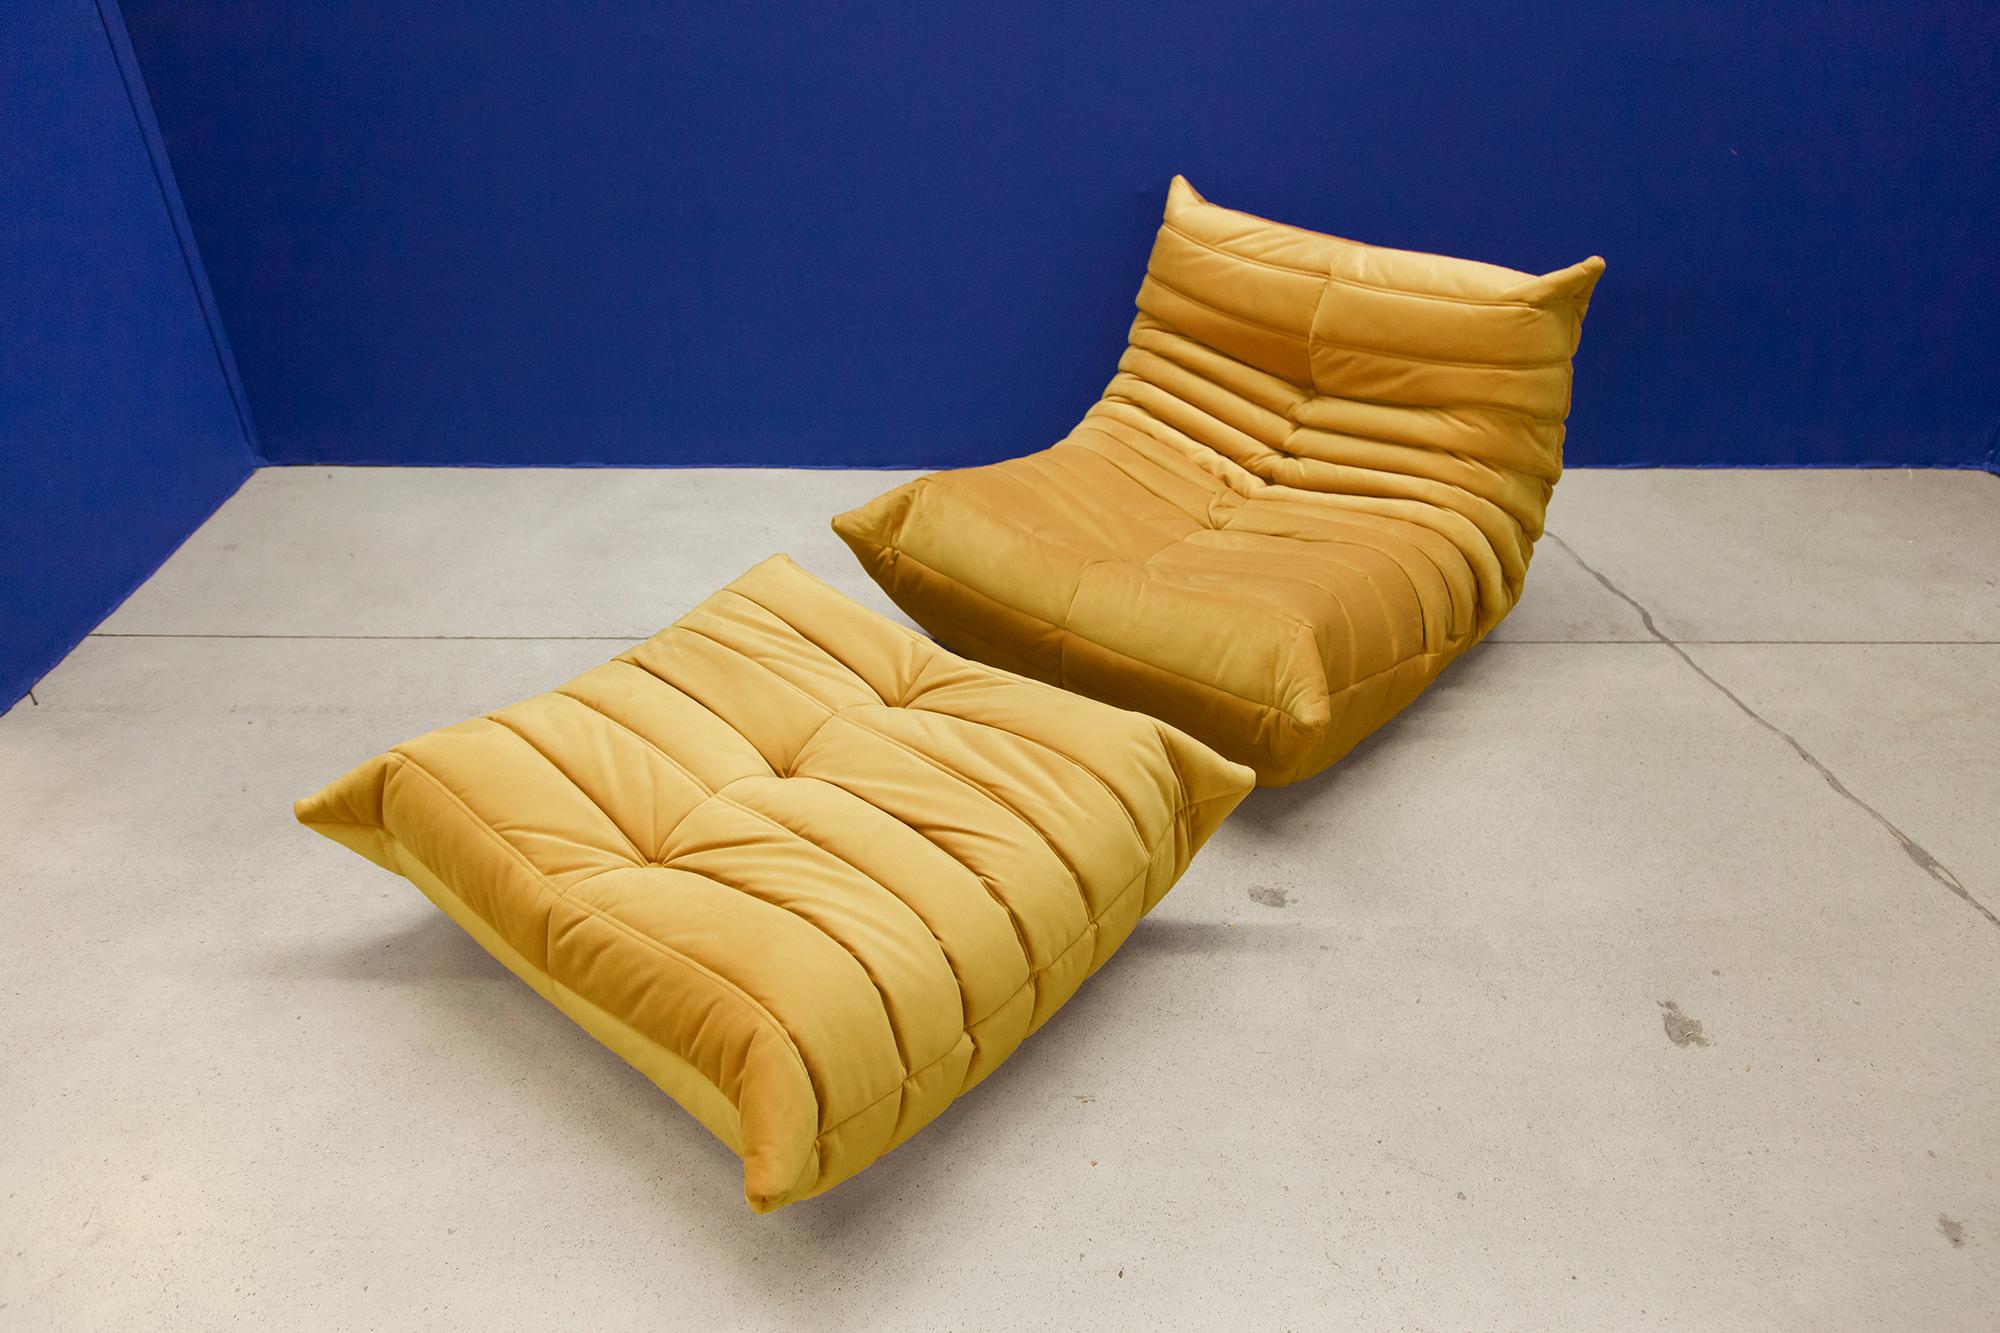 This Togo living room set was designed by Michel Ducaroy in 1973 and manufactured by Ligne Roset in France. It has been reupholstered in golden yellow high quality velvet, and is made up of the following pieces, each with the original Ligne Roset